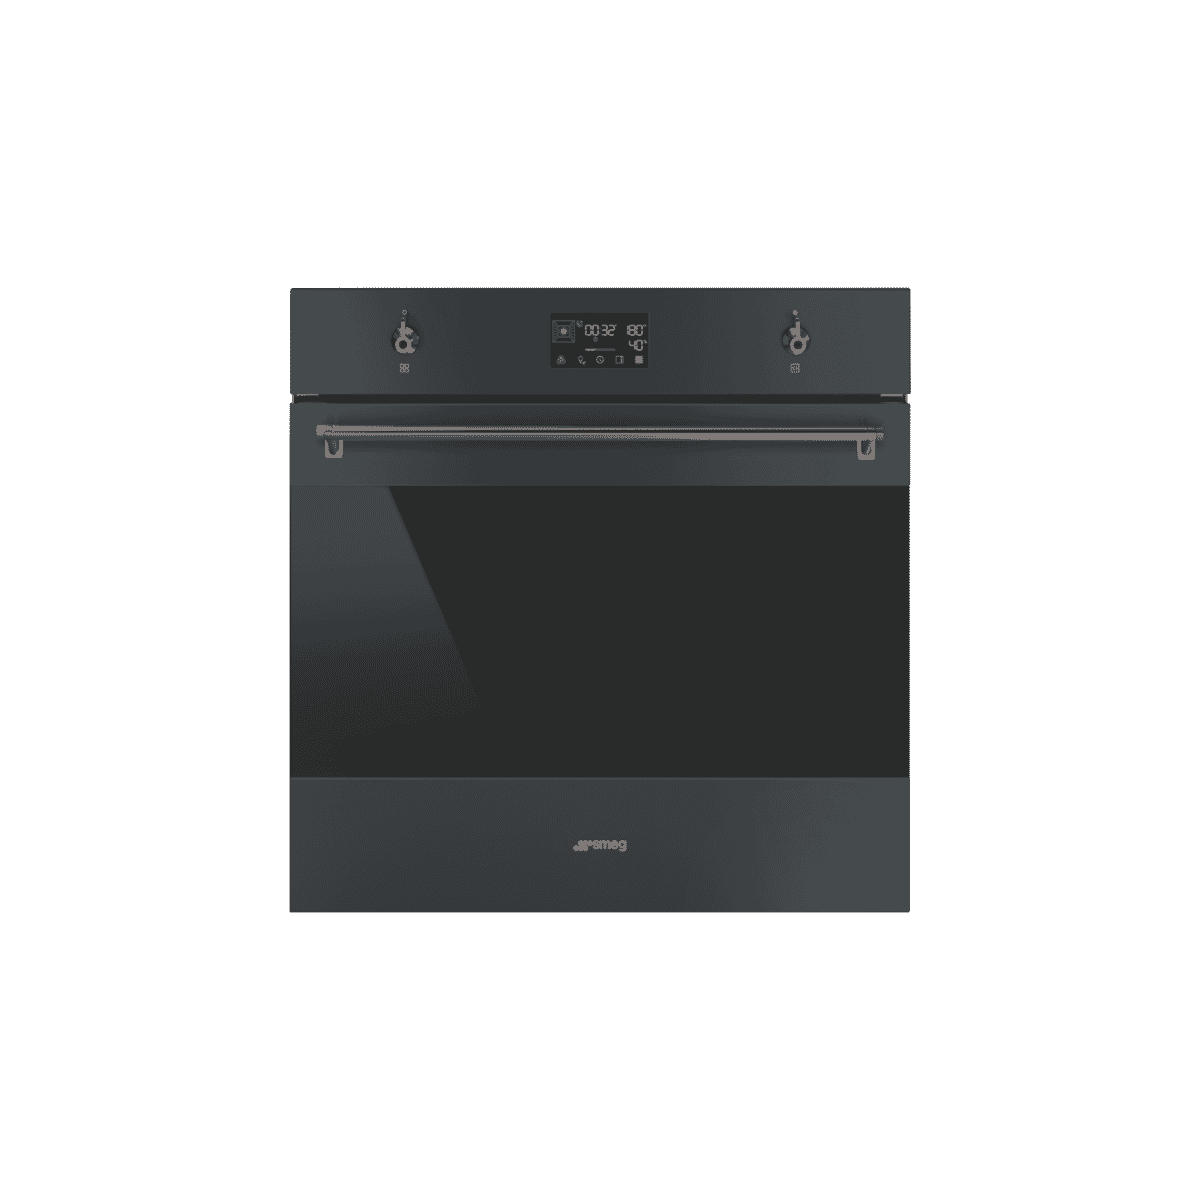 Smeg Classic Pyrosteam Oven - Air Fry & BBQ